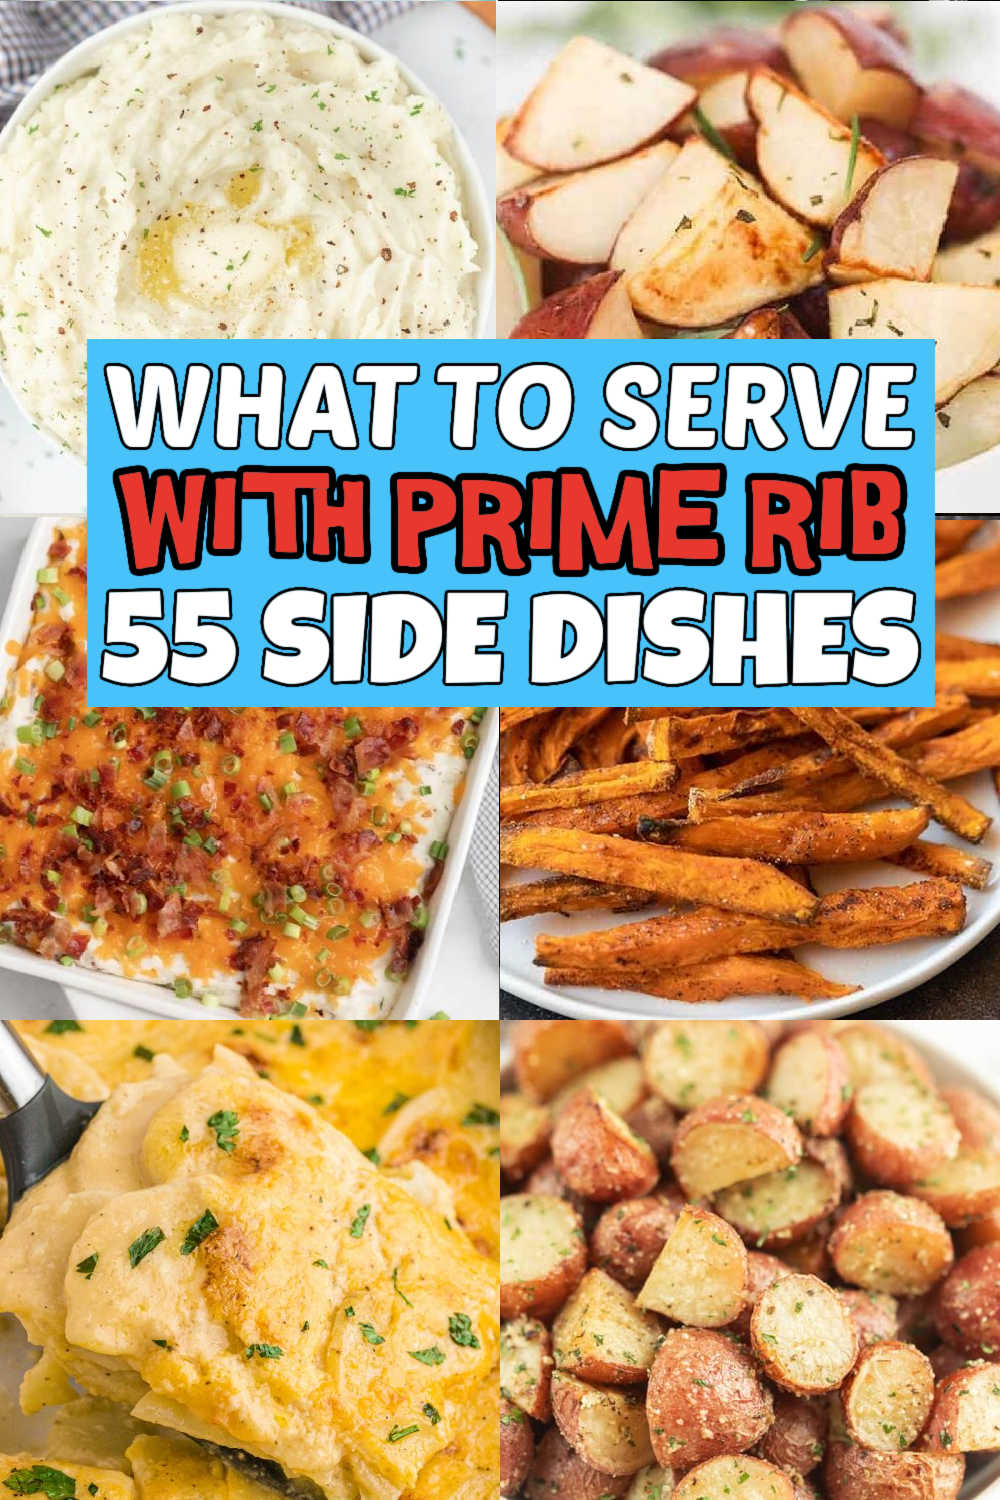 These 55 best prime rib sides all pair perfectly with the fancy holiday roast. Find out what to serve with prime rib with easy recipes. From traditional side dishes and holiday staples to unique recipes full of twists, these recipes will complete your meal. #eatingonadime #whattoservewithprimerib #primeribsidedishes